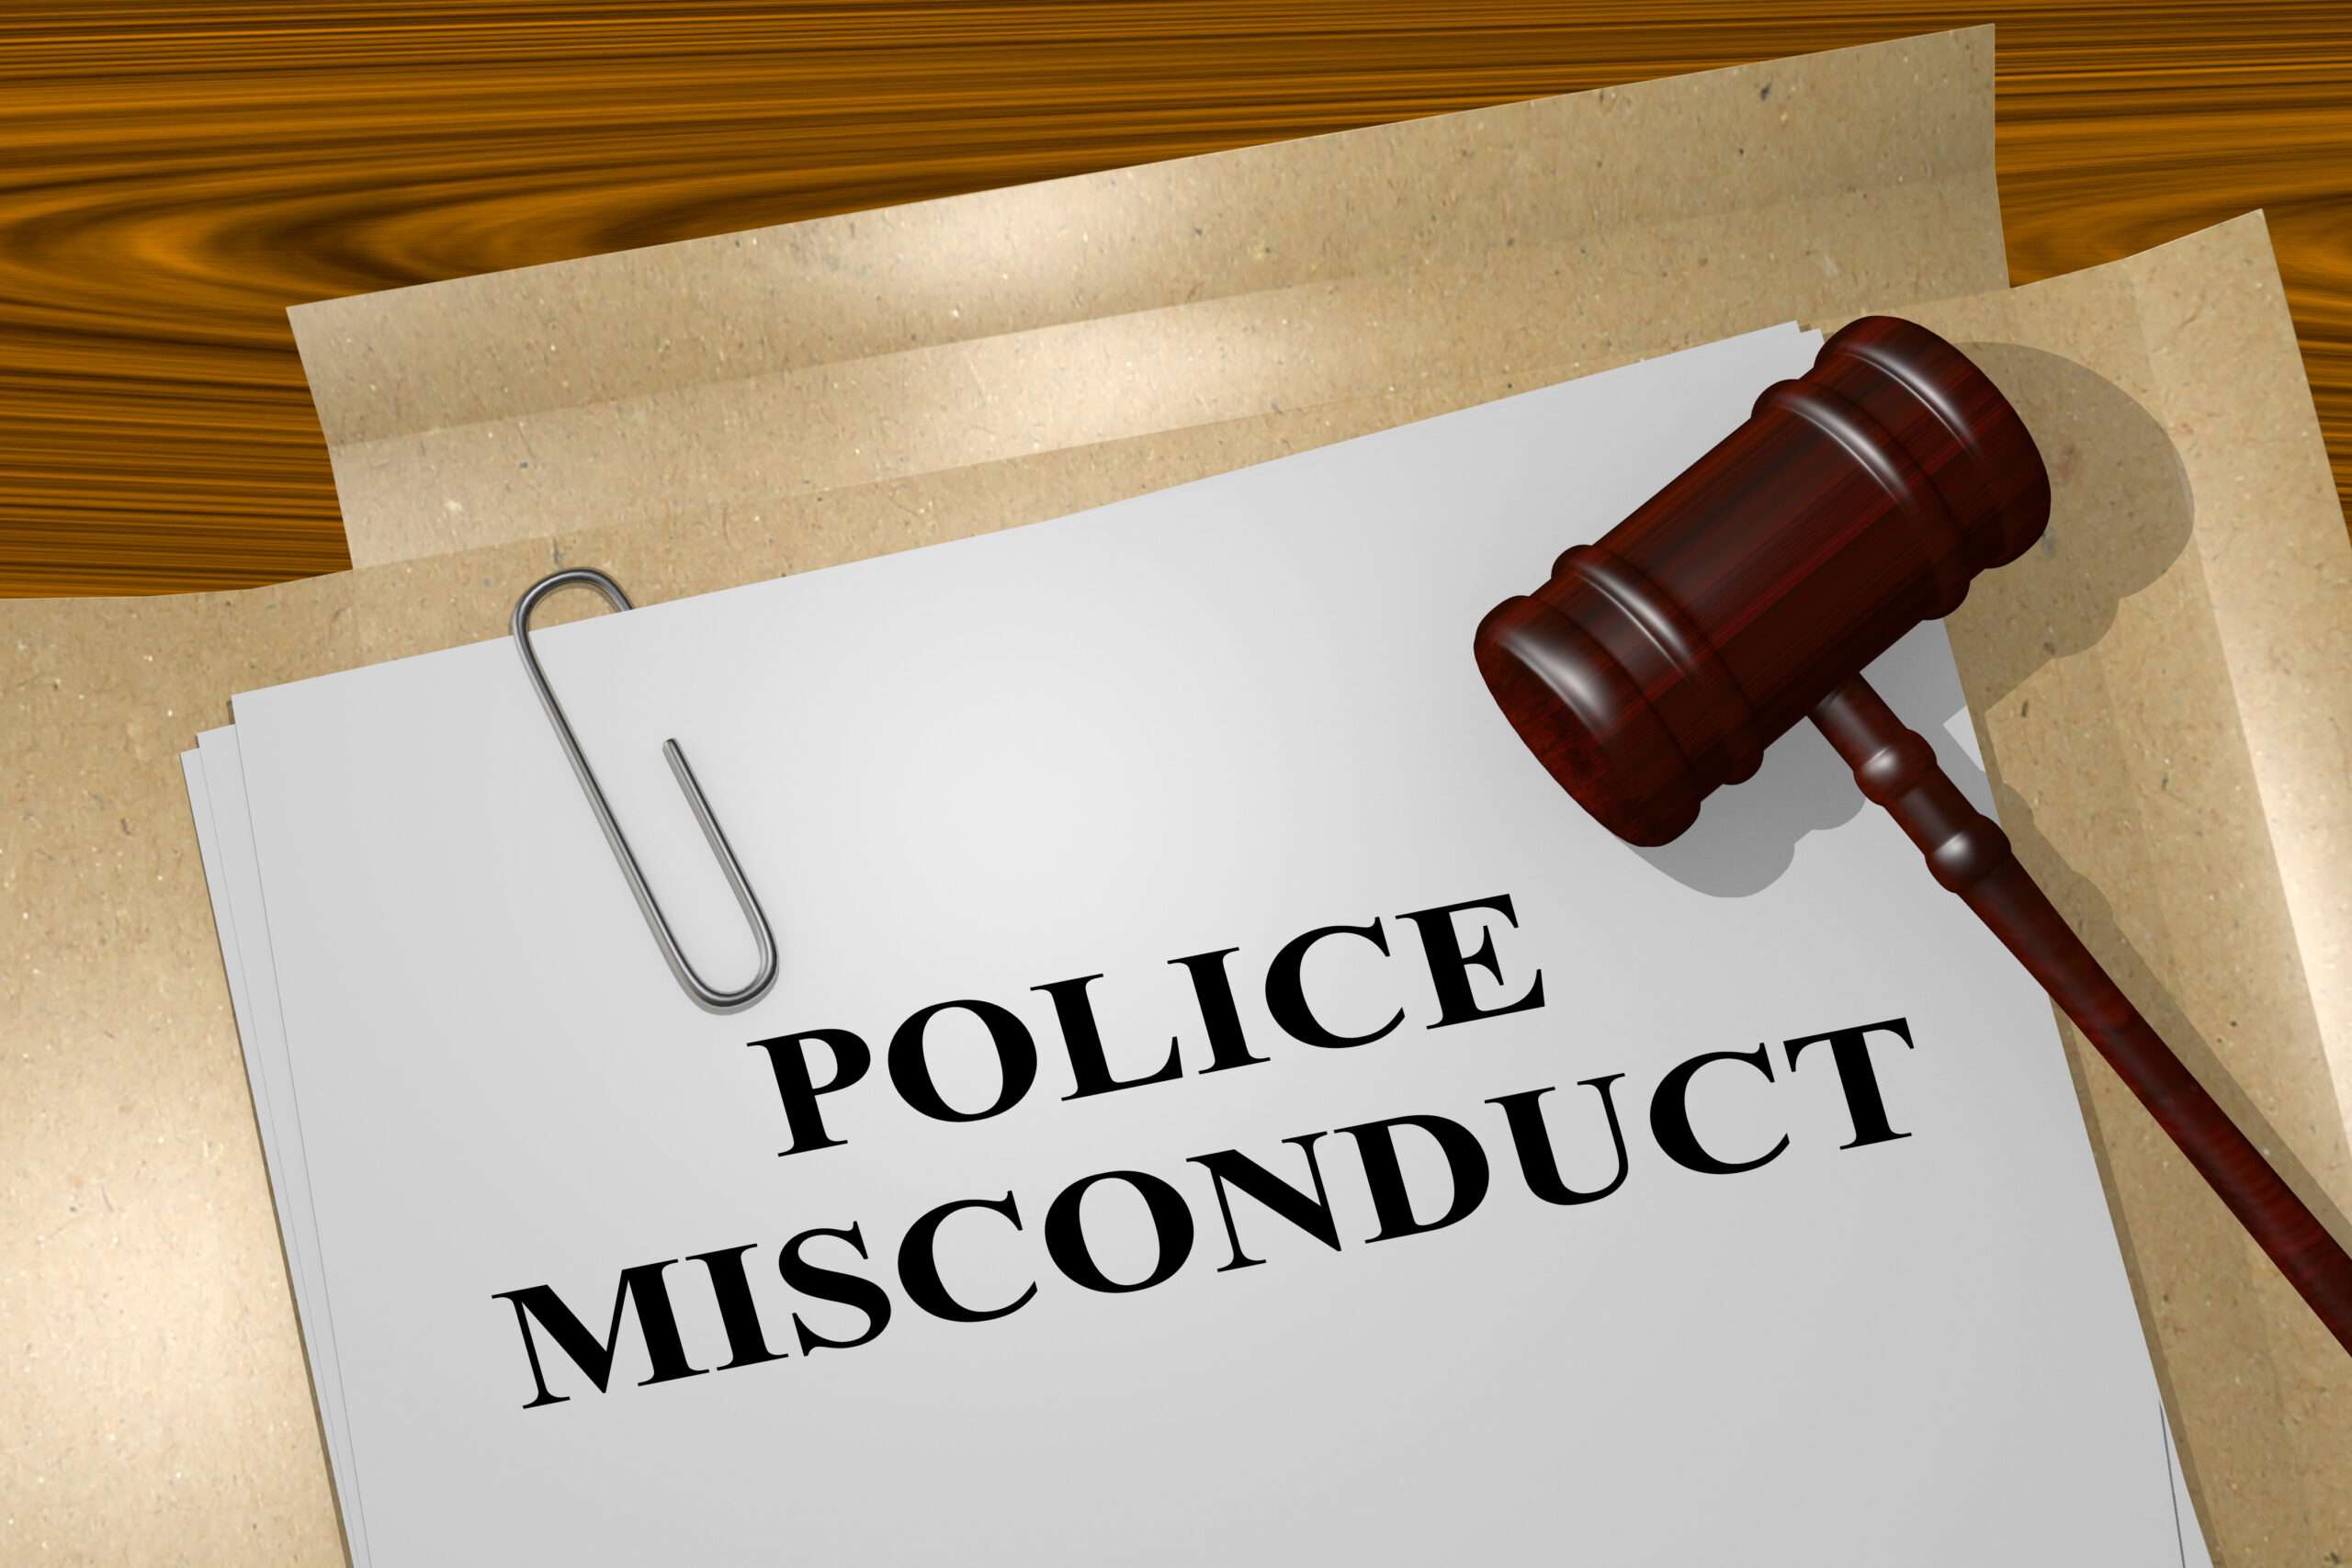 LPD reveals previously unreported officer misconduct investigation